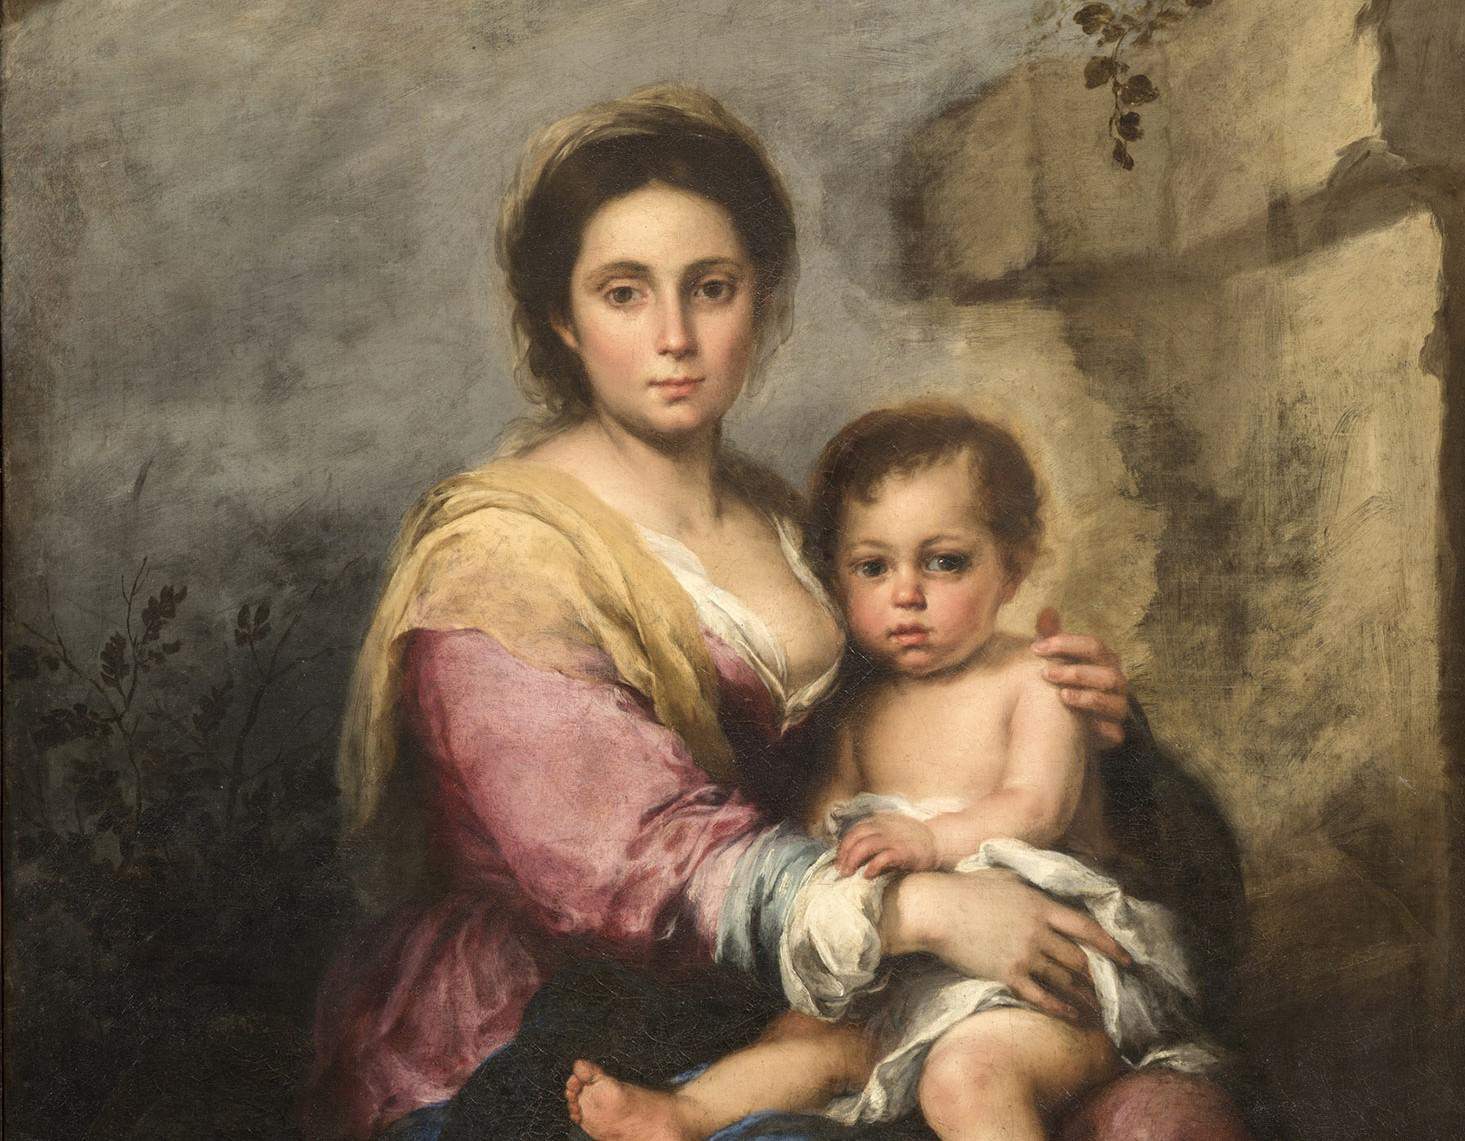 Rome, restoration of Murillo's Madonna of Milk reveals another painting